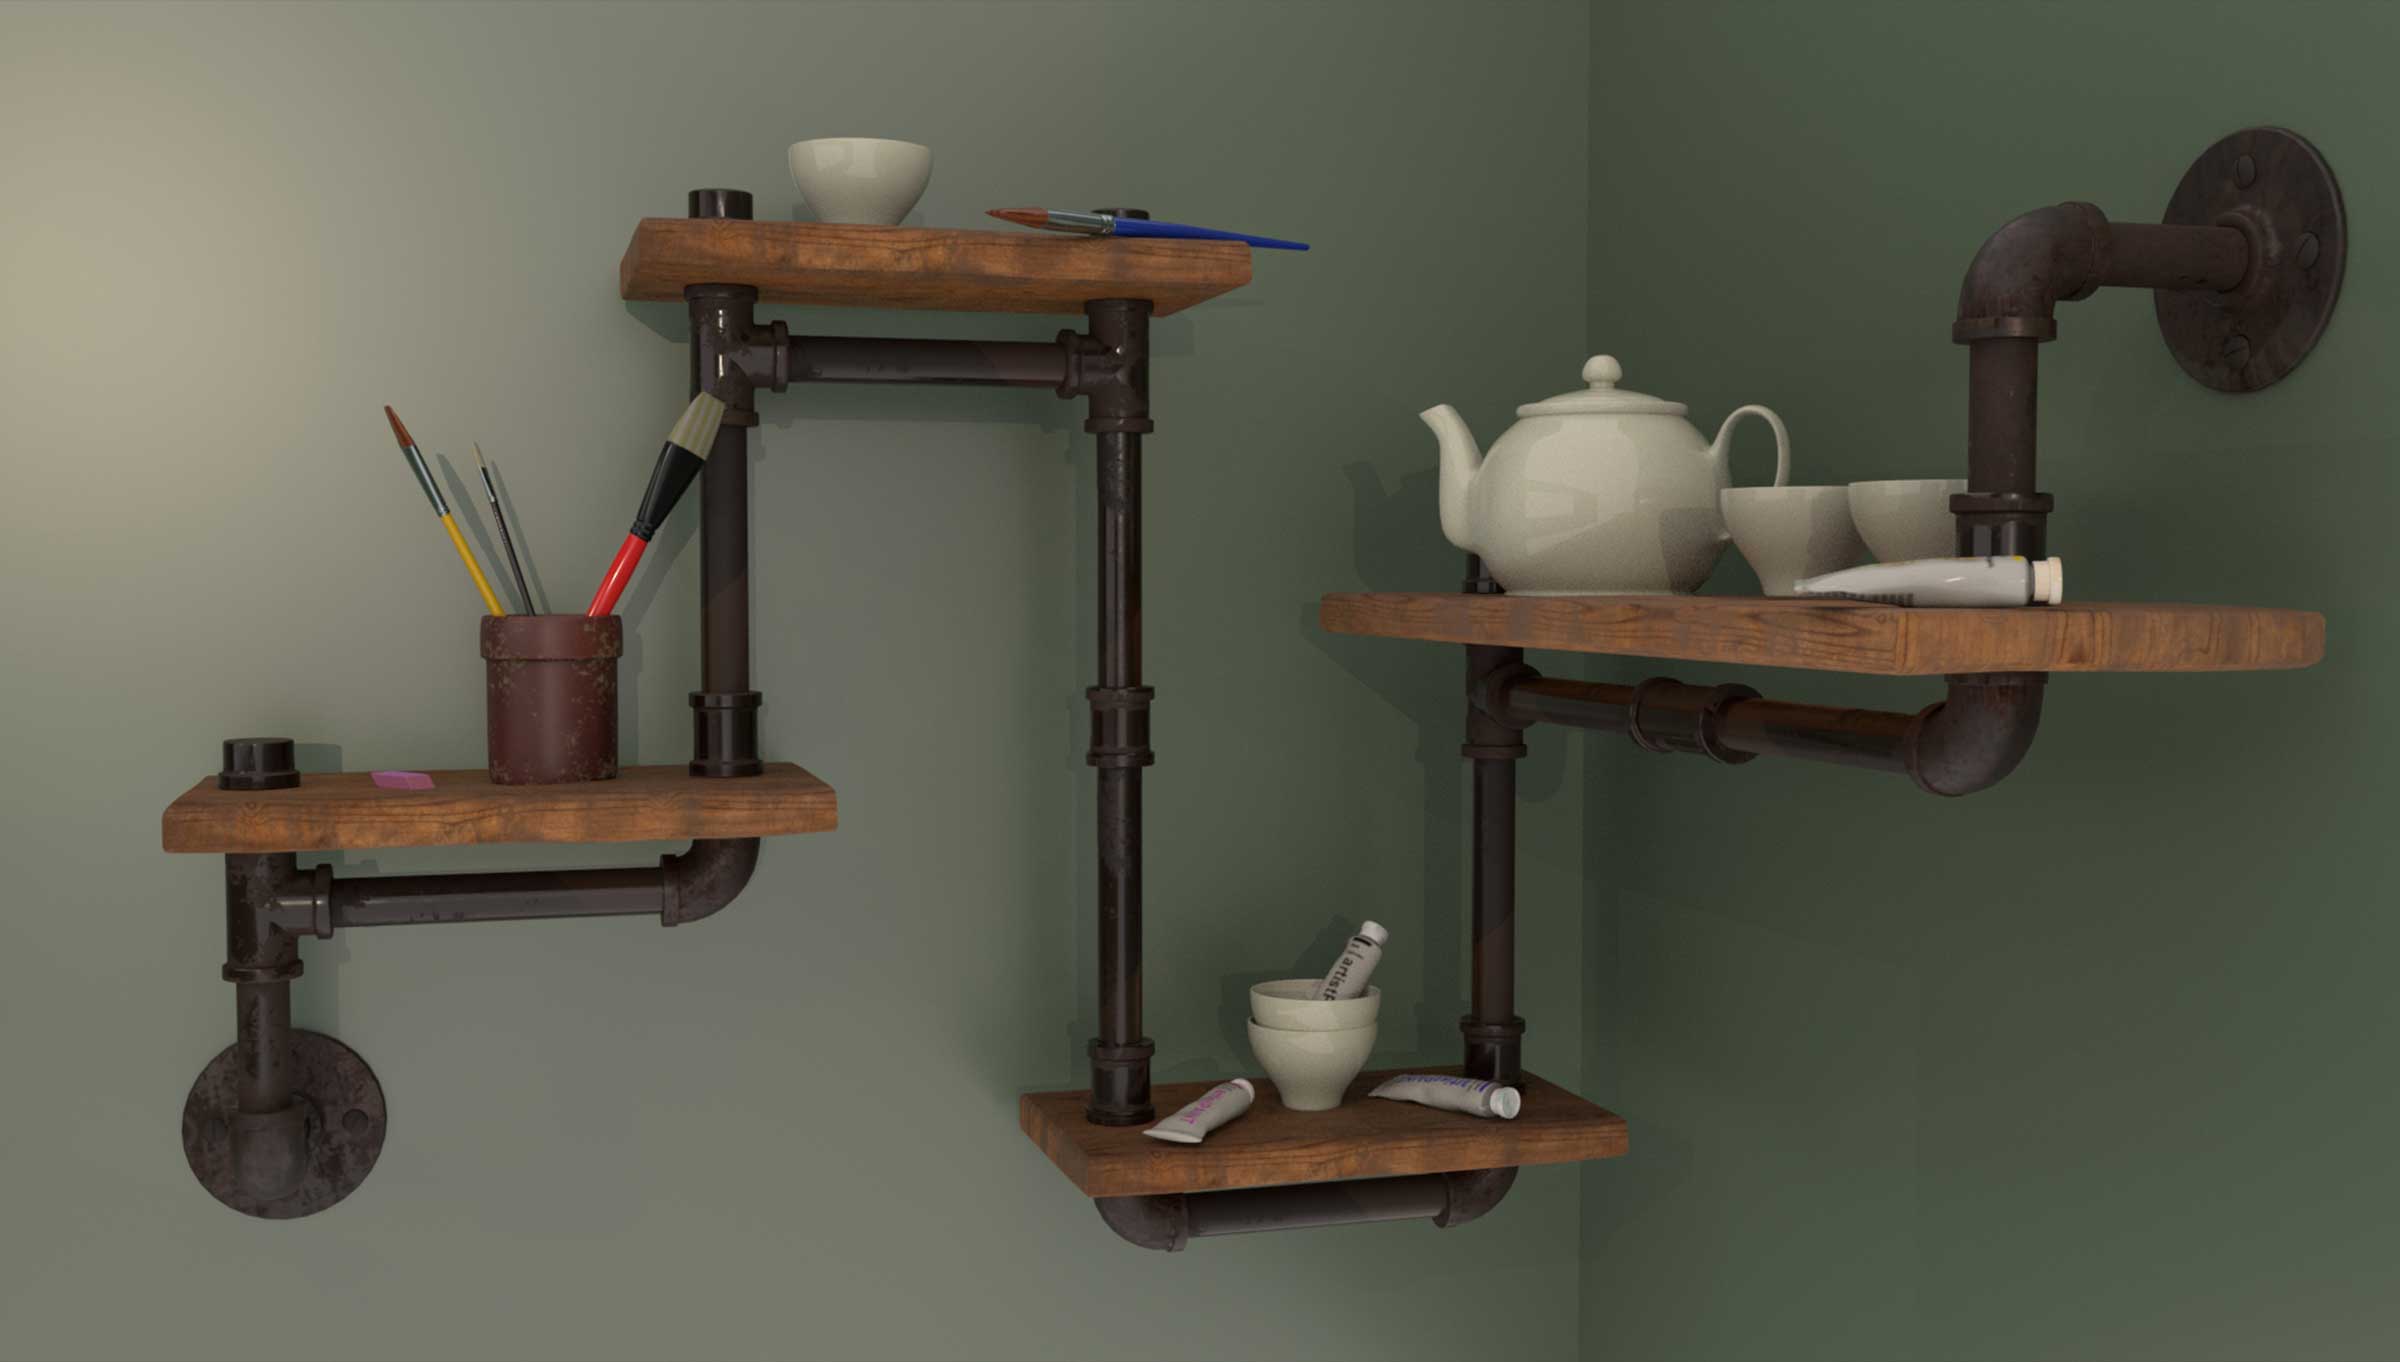 Rendered scene of various containers sitting atop wooden shelves supported by steel pipes